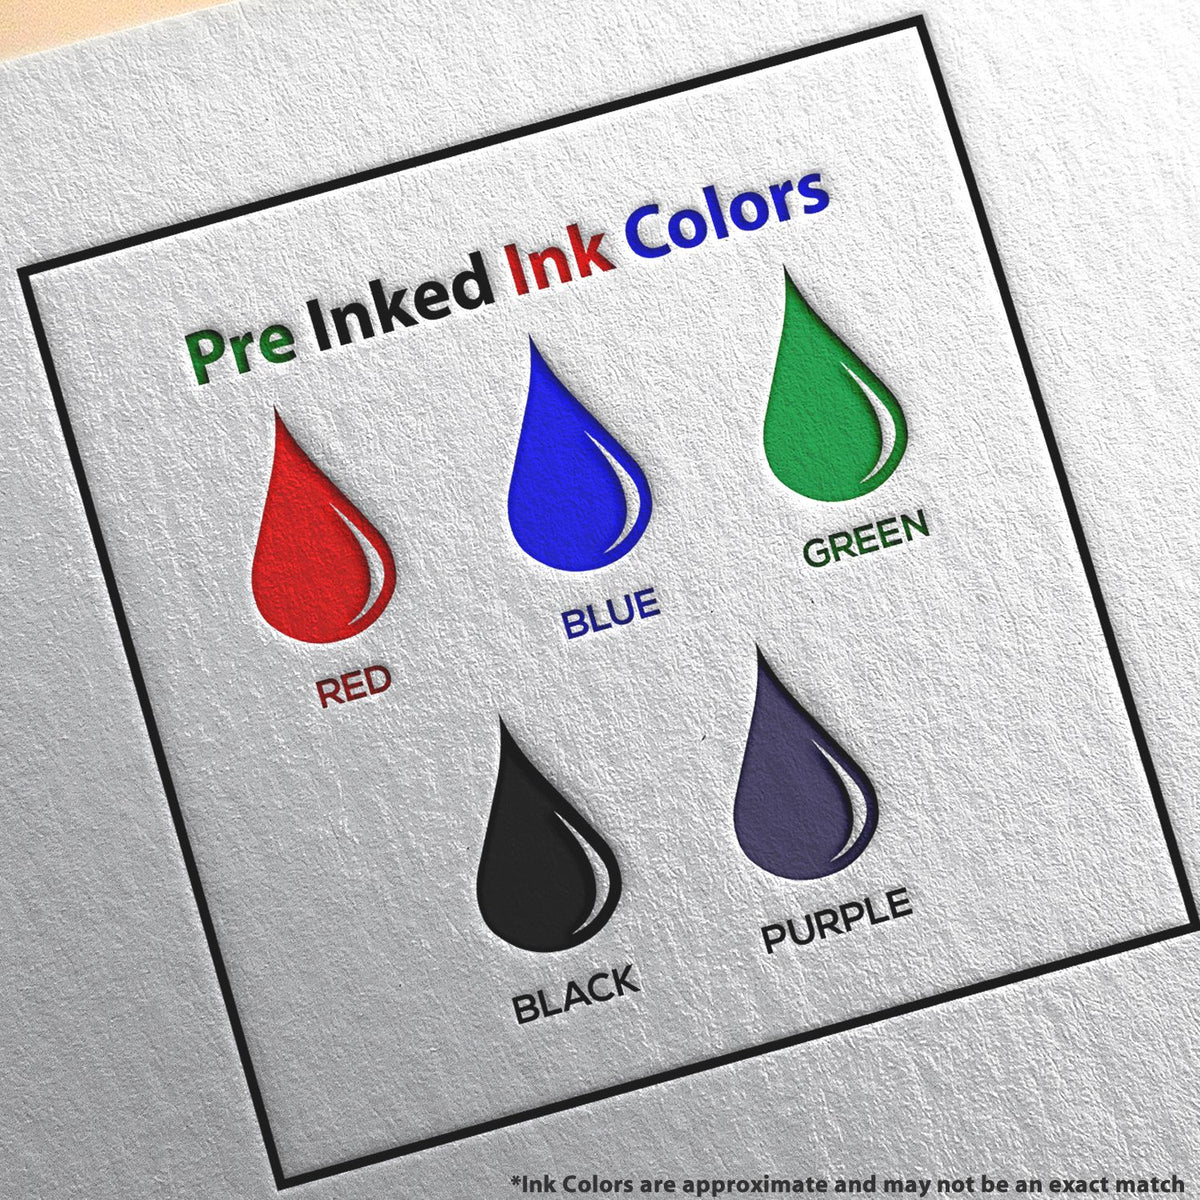 A picture showing the different ink colors or hues available for the Super Slim Maryland Notary Public Stamp product.